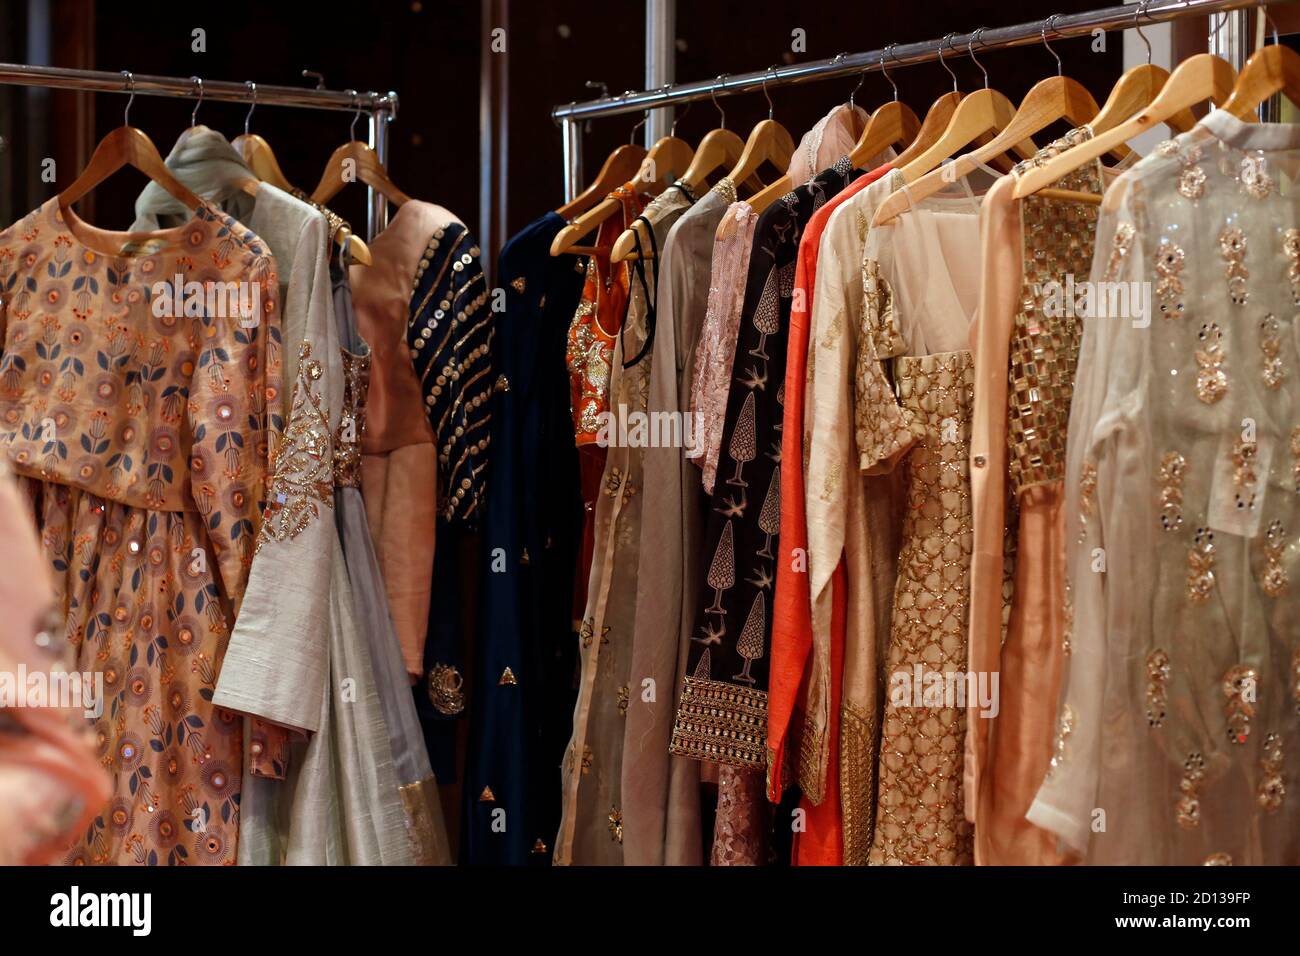 Hanging beautiful indian dresses different colors and decoration at market,  shop, boutique, bazaar, fashion clothes designer collection Stock Photo -  Alamy